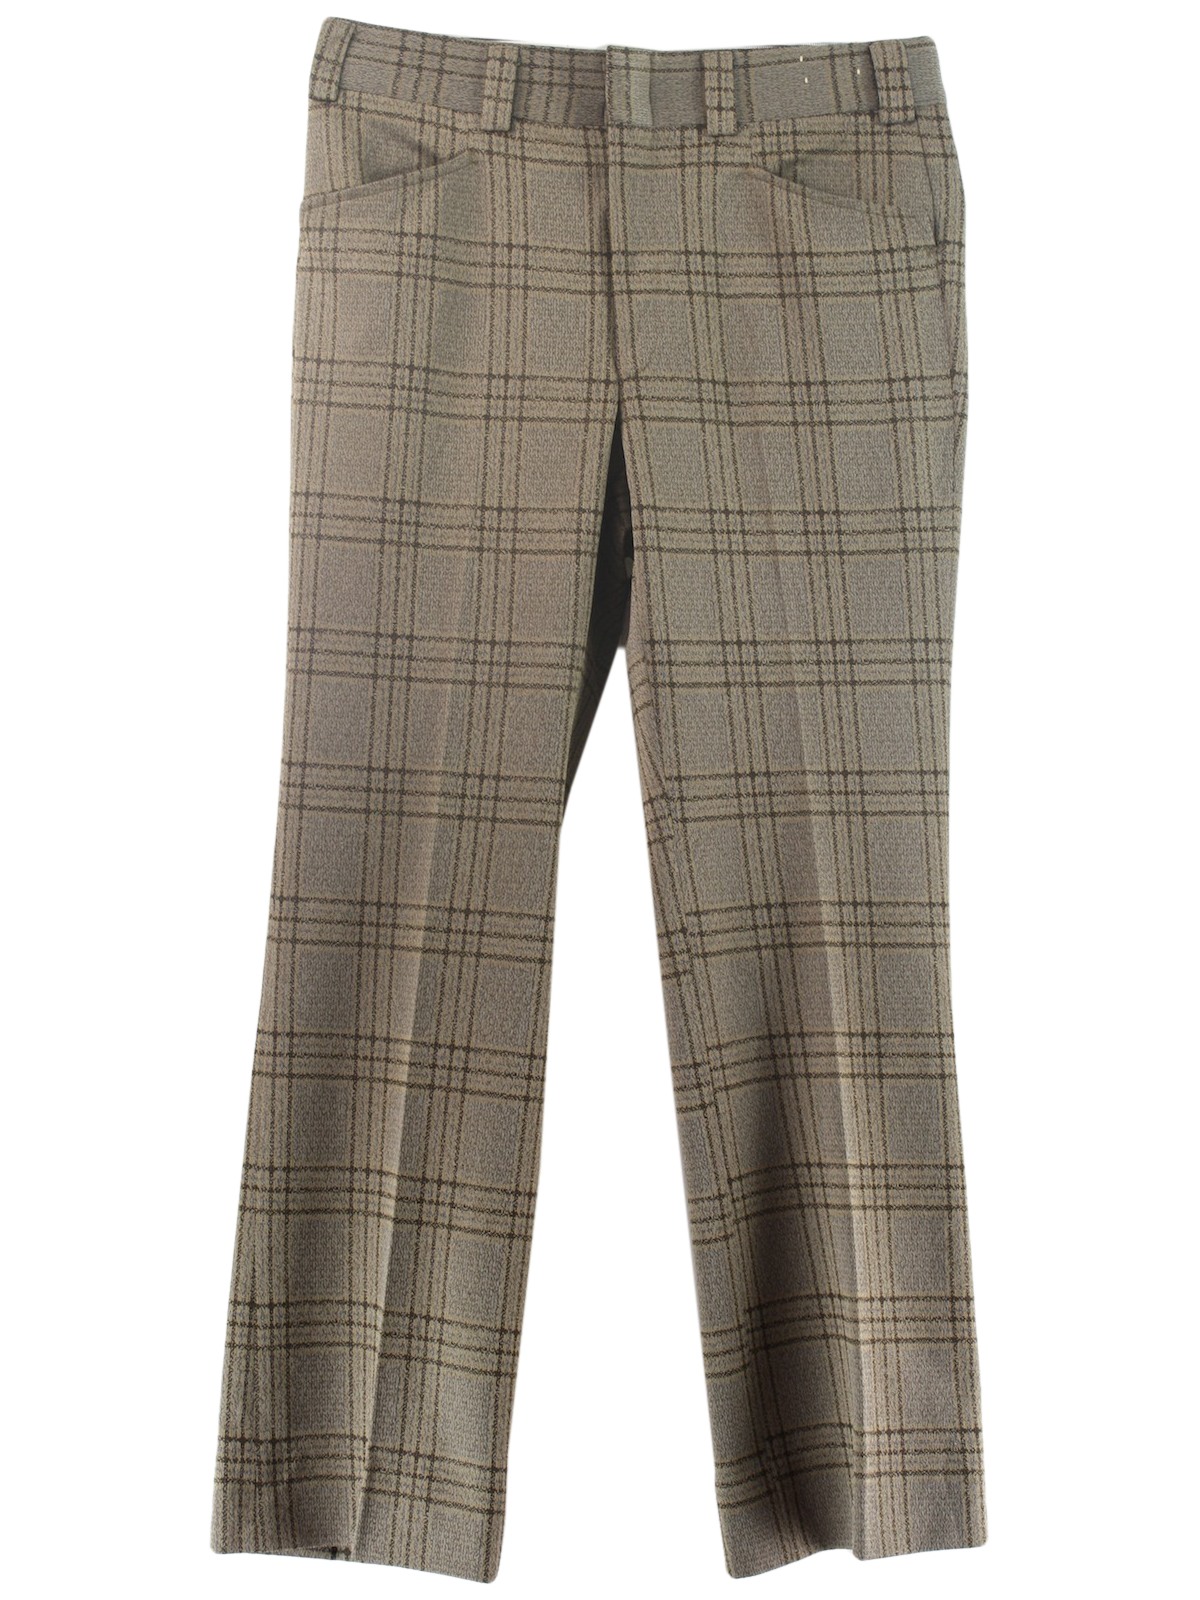 1970's Retro Pants: 70s -Missing Label- Mens tan and brown windowpane ...